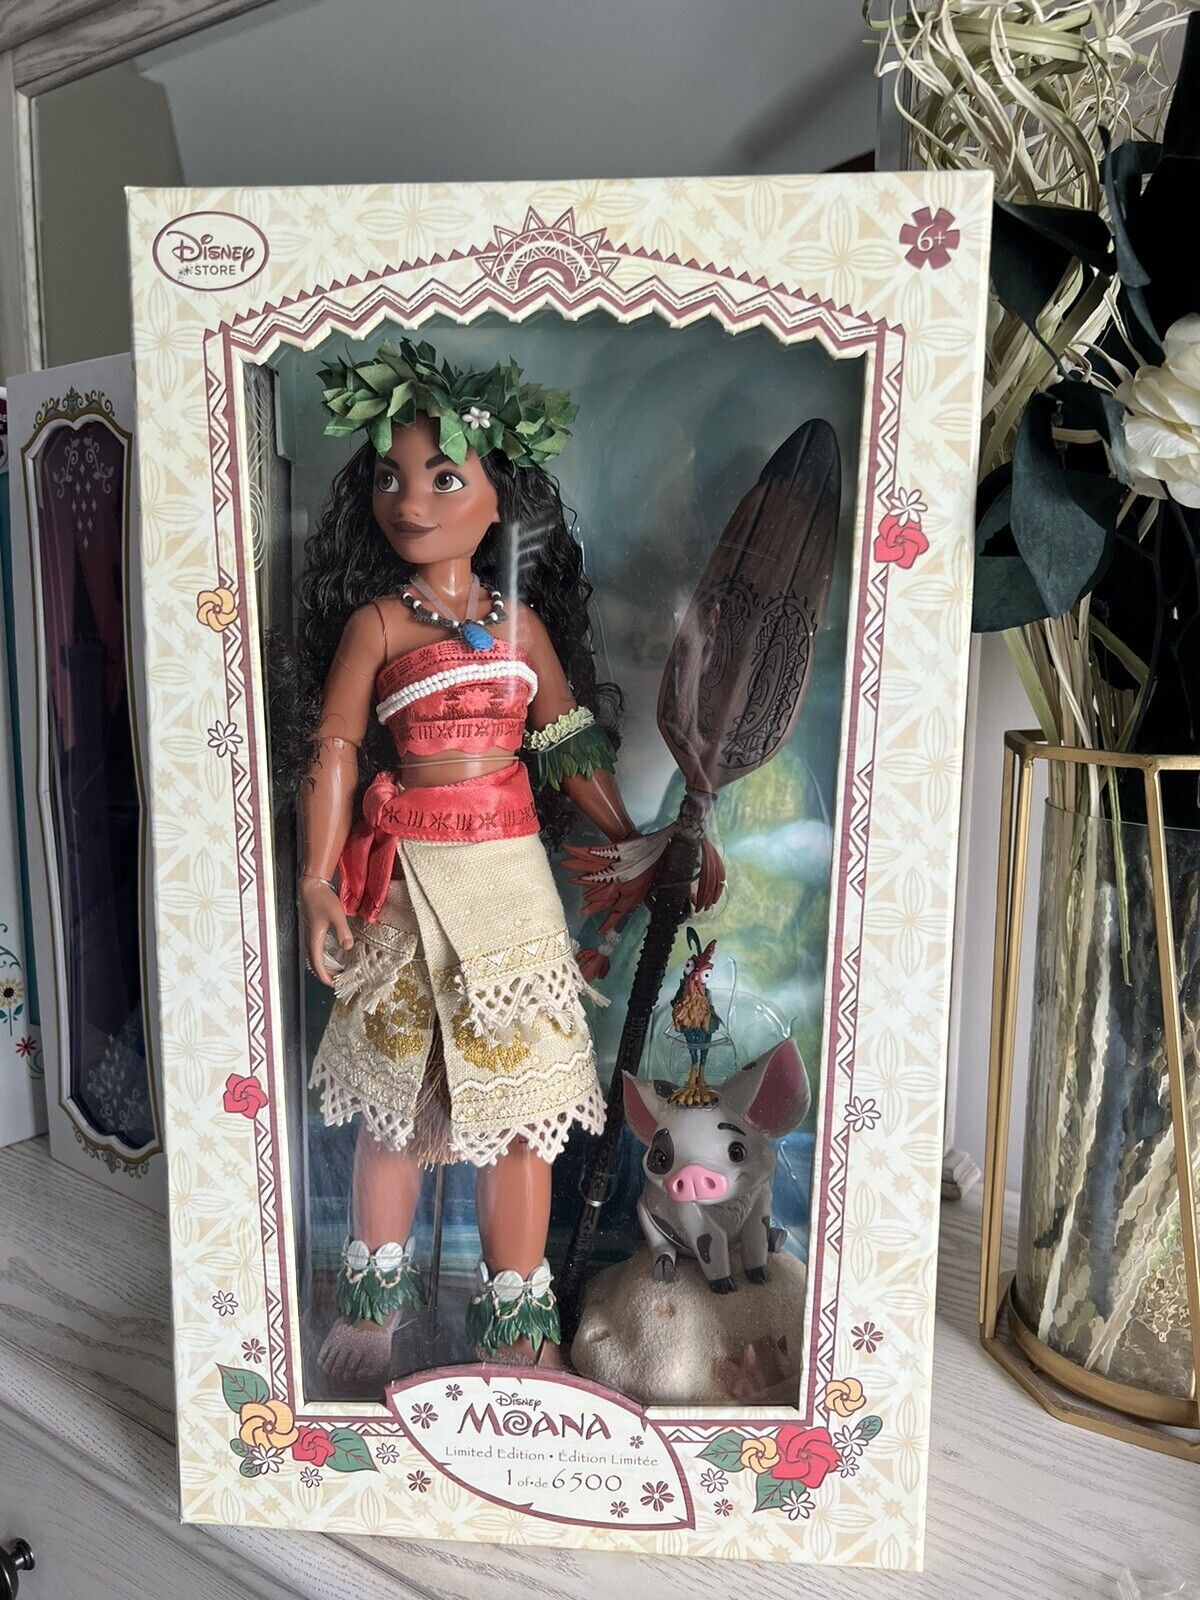 Disney Store Limited Edition 6500 Moana 17” Doll with Pua and Hei-Hei NEW Rare